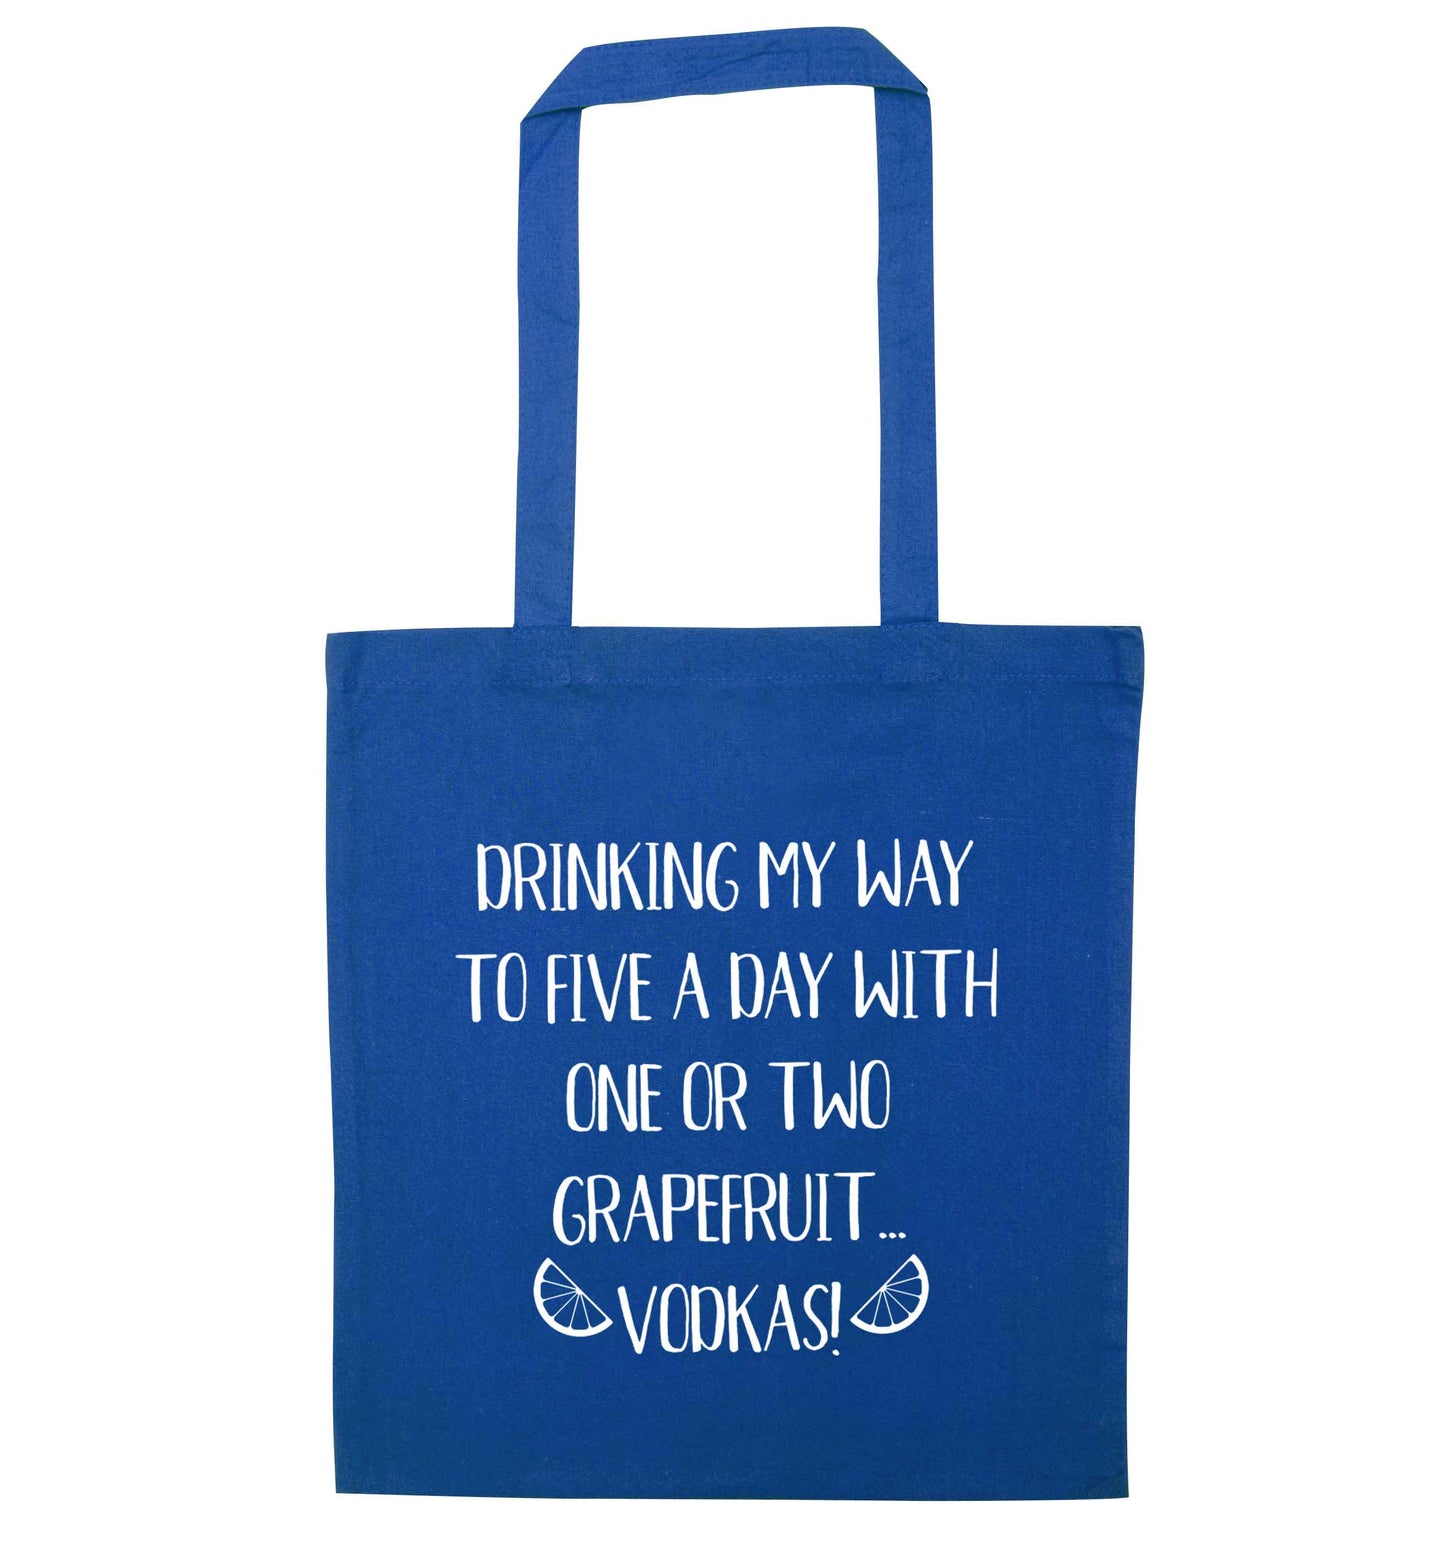 Drinking my way to five a day with one or two grapefruit vodkas blue tote bag